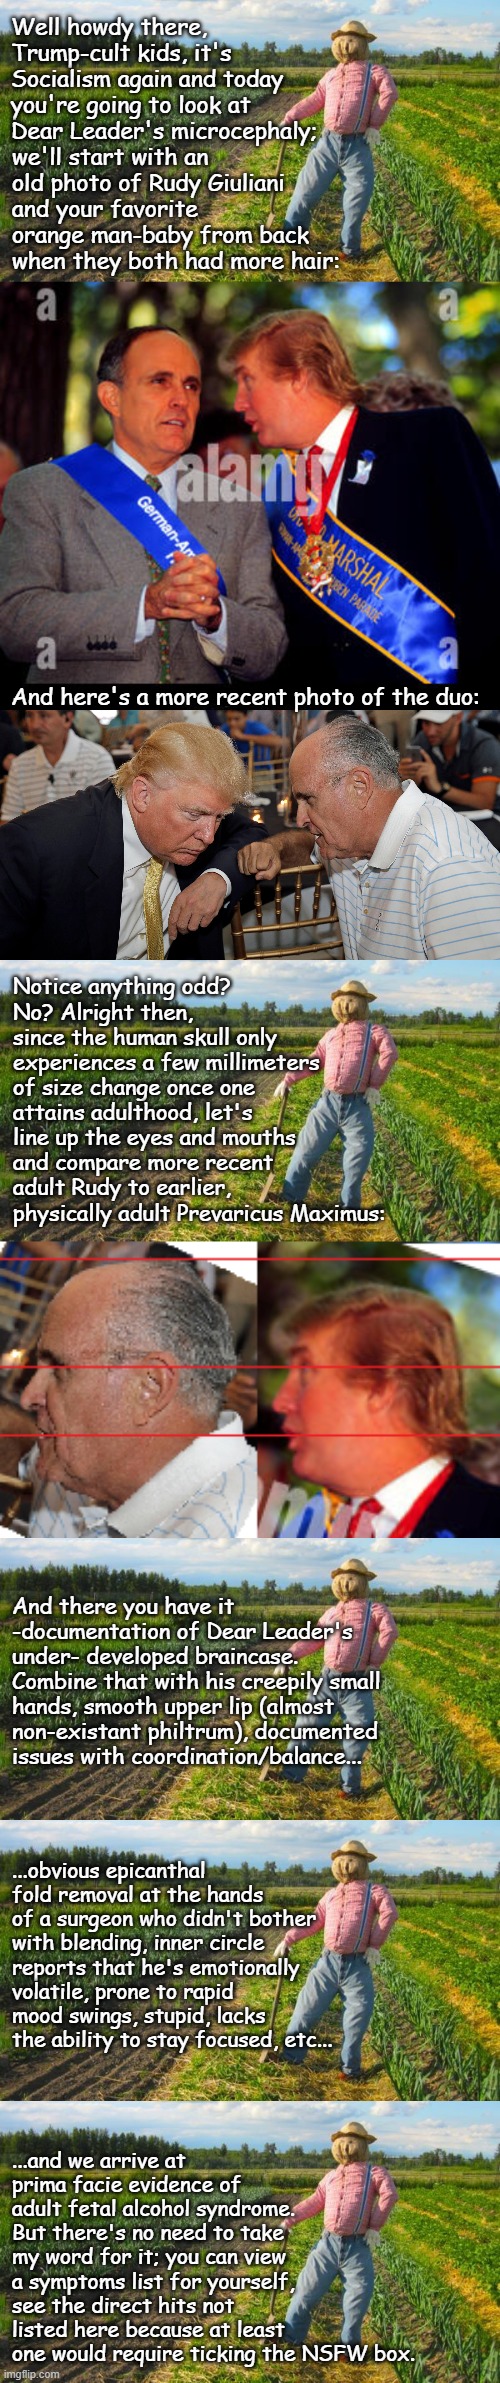 You were promised more on Fetal Alcohol Syndrome, you're getting more on Fetal Alcohol Syndrome. | Well howdy there, Trump-cult kids, it's Socialism again and today you're going to look at Dear Leader's microcephaly;; we'll start with an old photo of Rudy Giuliani and your favorite orange man-baby from back when they both had more hair:; And here's a more recent photo of the duo:; Notice anything odd?
No? Alright then, since the human skull only experiences a few millimeters of size change once one attains adulthood, let's line up the eyes and mouths and compare more recent adult Rudy to earlier, physically adult Prevaricus Maximus:; And there you have it -documentation of Dear Leader's under- developed braincase. Combine that with his creepily small hands, smooth upper lip (almost non-existant philtrum), documented issues with coordination/balance... ...obvious epicanthal fold removal at the hands of a surgeon who didn't bother with blending, inner circle reports that he's emotionally volatile, prone to rapid mood swings, stupid, lacks the ability to stay focused, etc... ...and we arrive at prima facie evidence of adult fetal alcohol syndrome.  But there's no need to take my word for it; you can view a symptoms list for yourself, see the direct hits not listed here because at least one would require ticking the NSFW box. | image tagged in scarecrow in field,microcephaly,trump unfit unqualified dangerous,mentally incompetent,evil clown | made w/ Imgflip meme maker